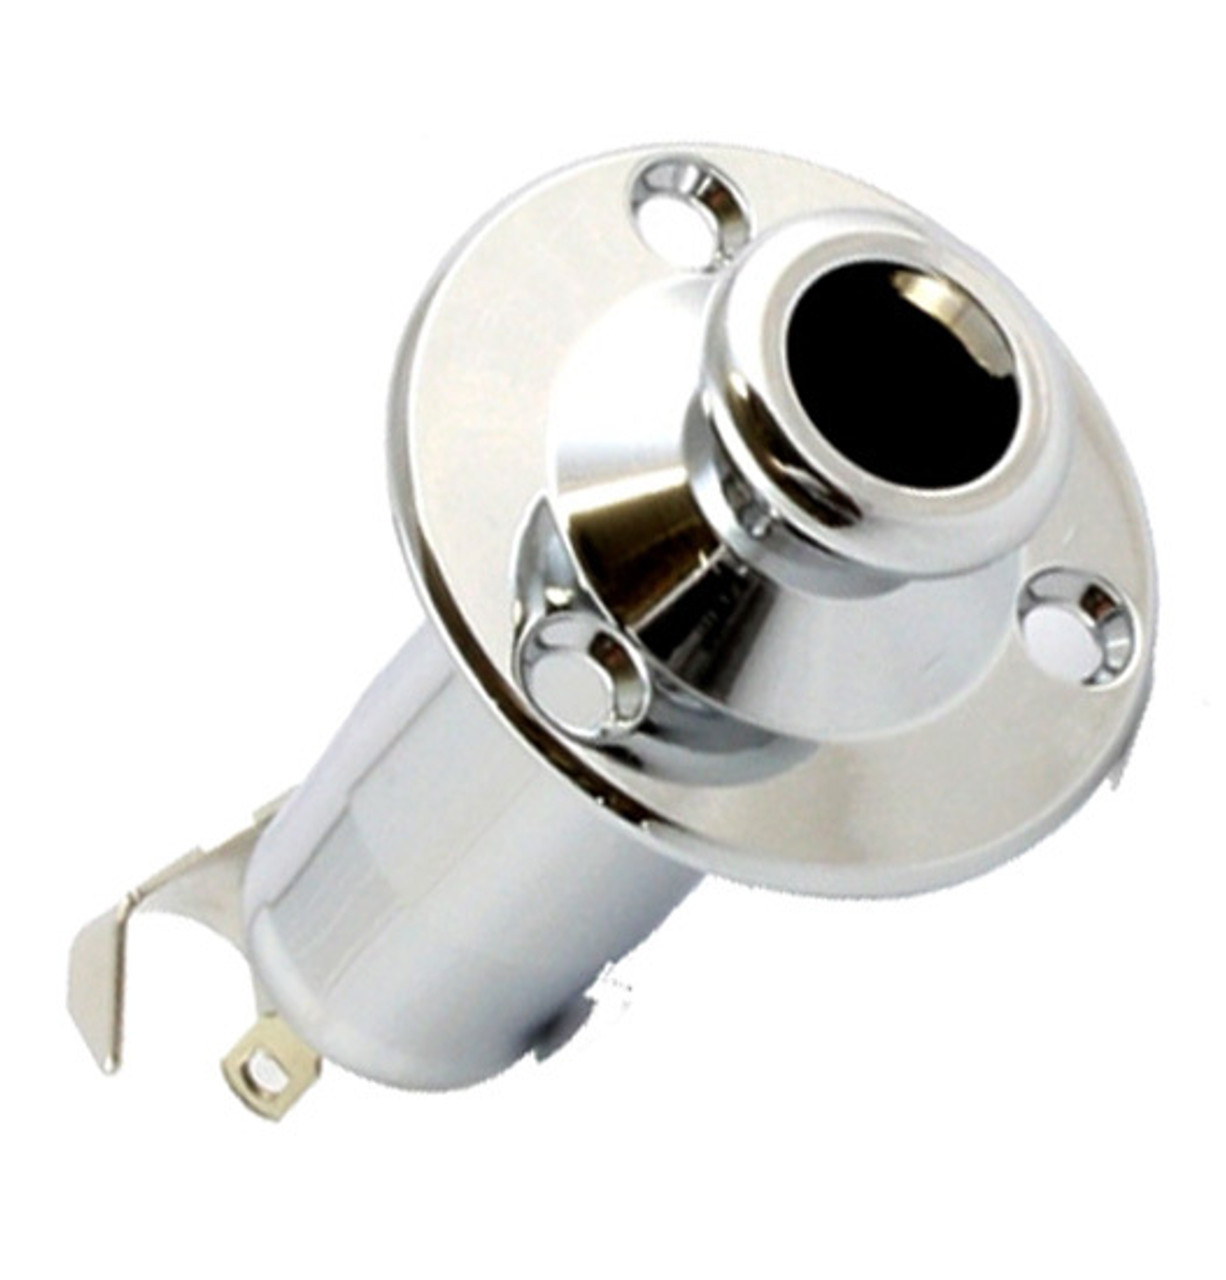 GT Takamine Style Stereo Endpin Jack Socket in Chrome Finish (Pk-1)